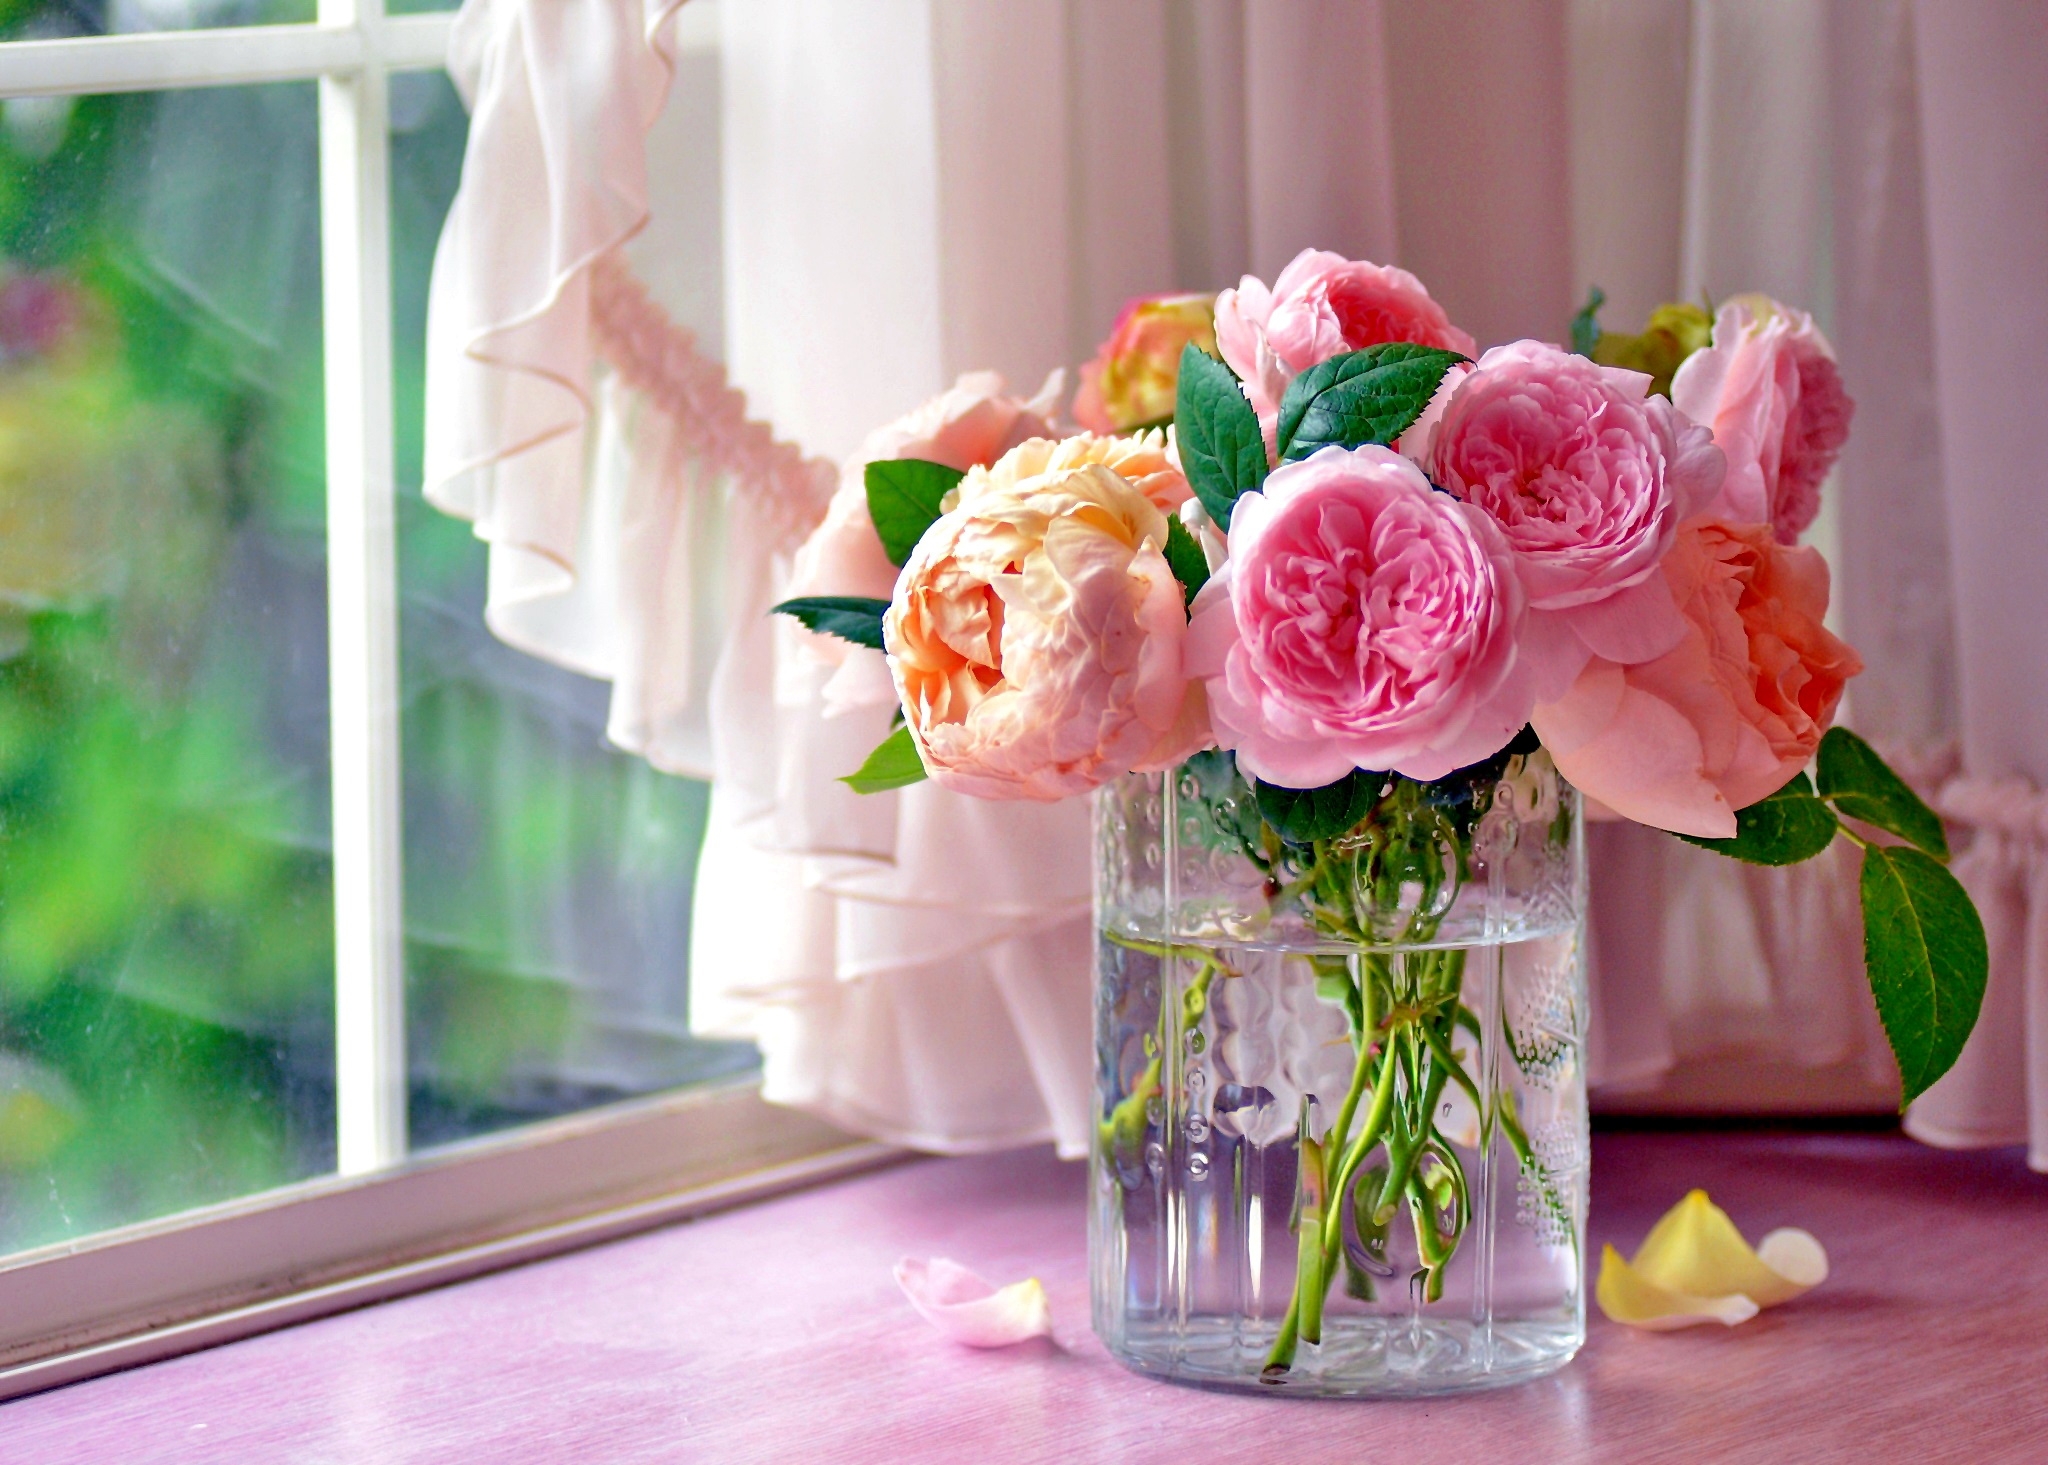 Pastel-colored Cabbage Roses In Vase By The Window - Flower Vase On Window , HD Wallpaper & Backgrounds